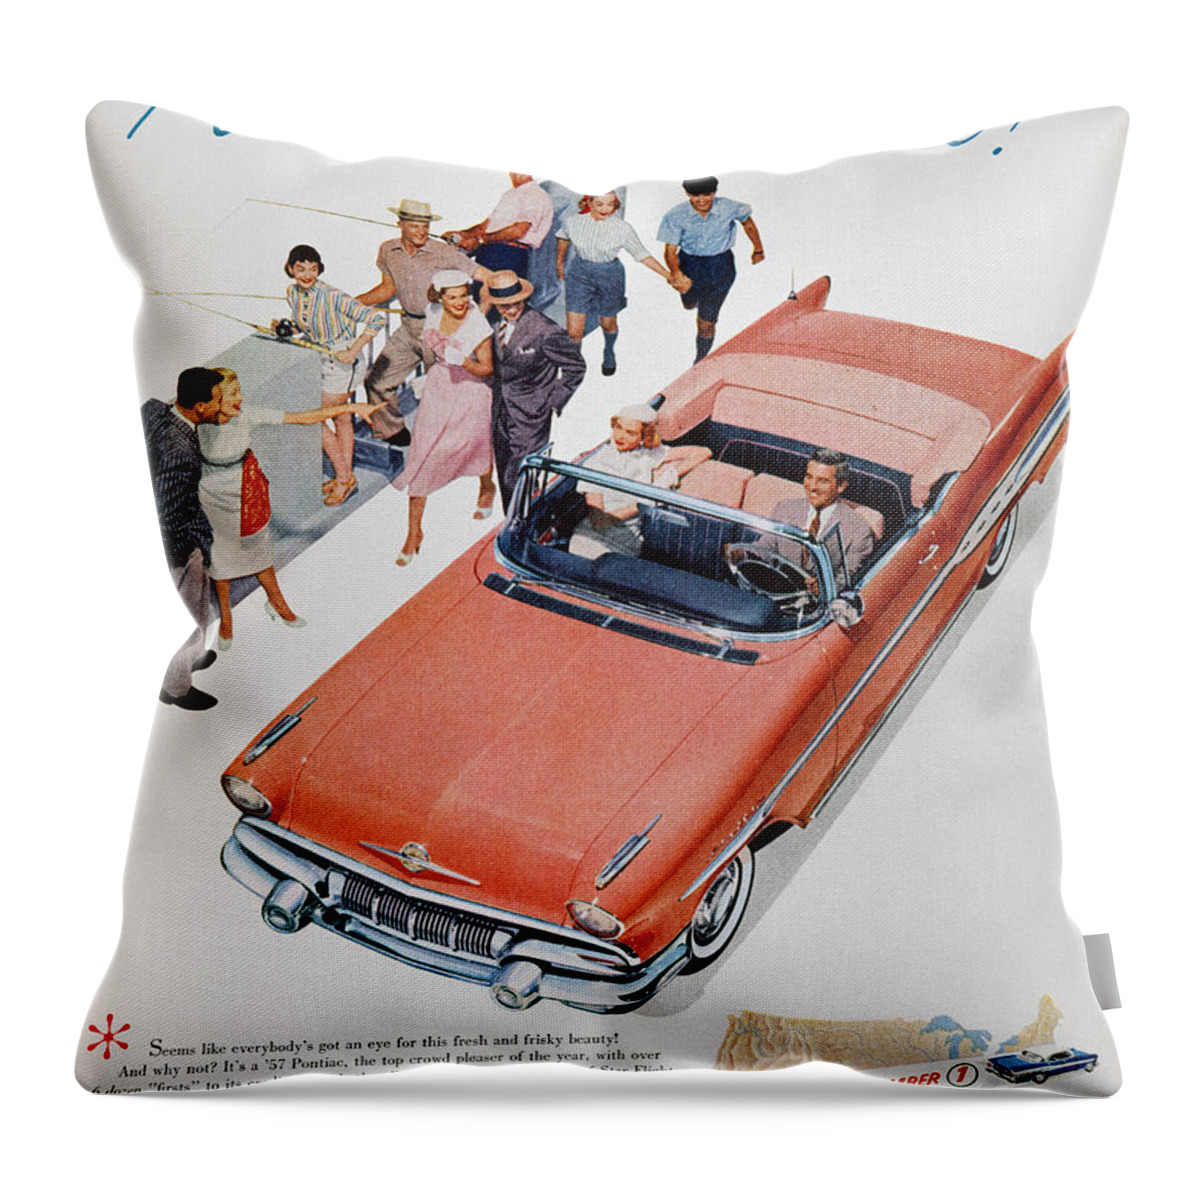 1957 Throw Pillow featuring the photograph Pontiac Advertisement 1957 by Granger